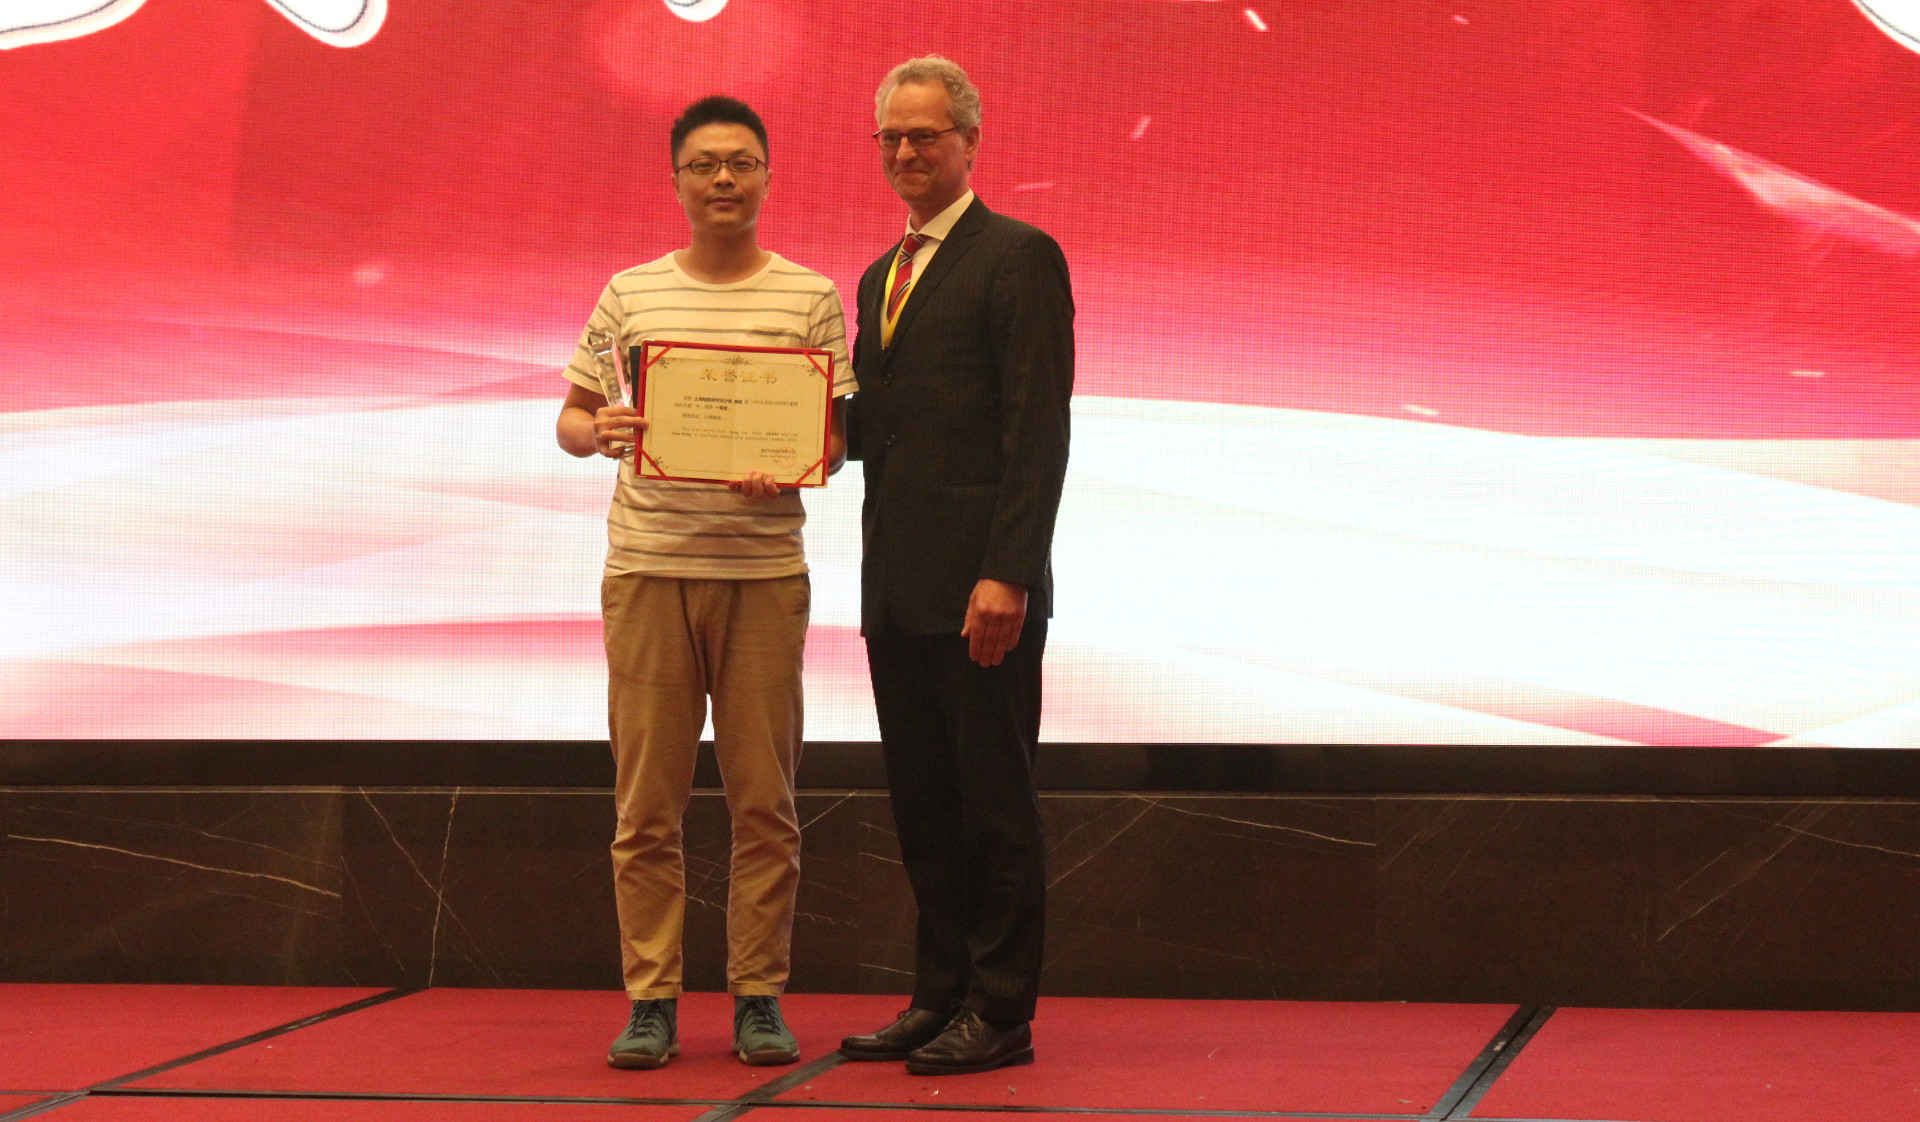 Mr. Liu Yang from SDARI won the first price of the design competition